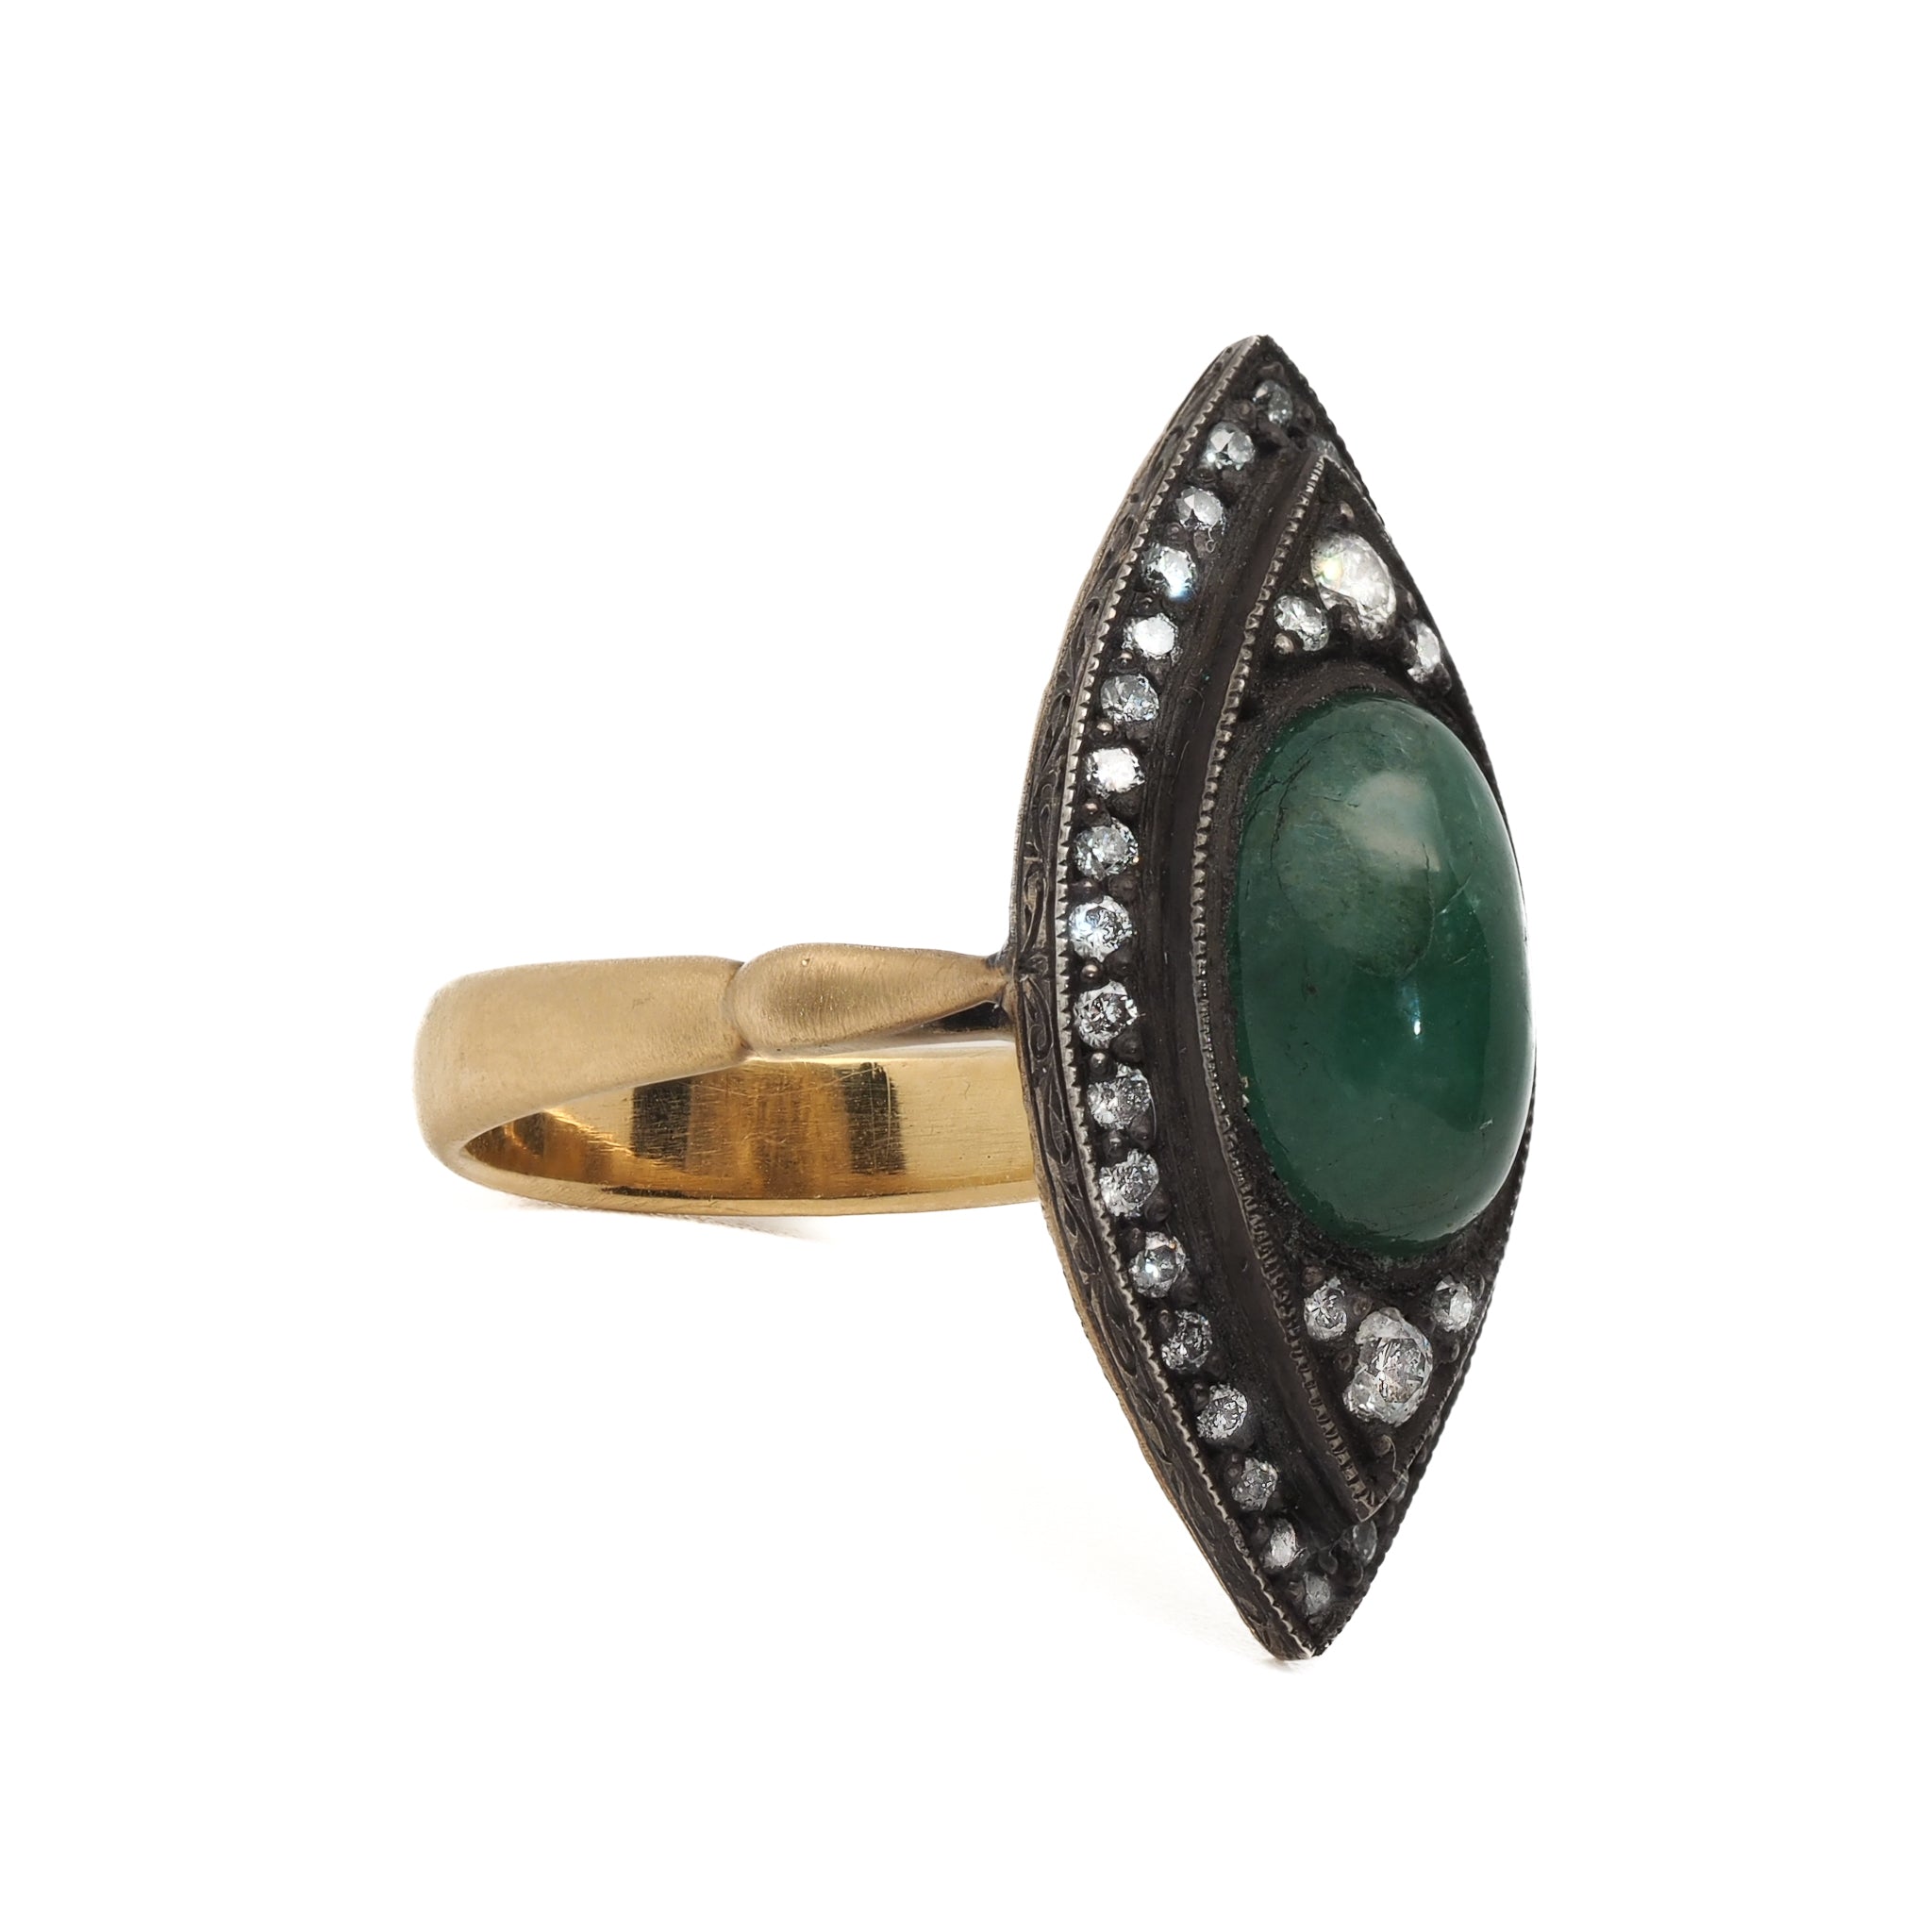 Close-up of the Emerald &amp; Diamond Eye Ring showcasing the vibrant green emerald and the intricate details of the eye-inspired design.